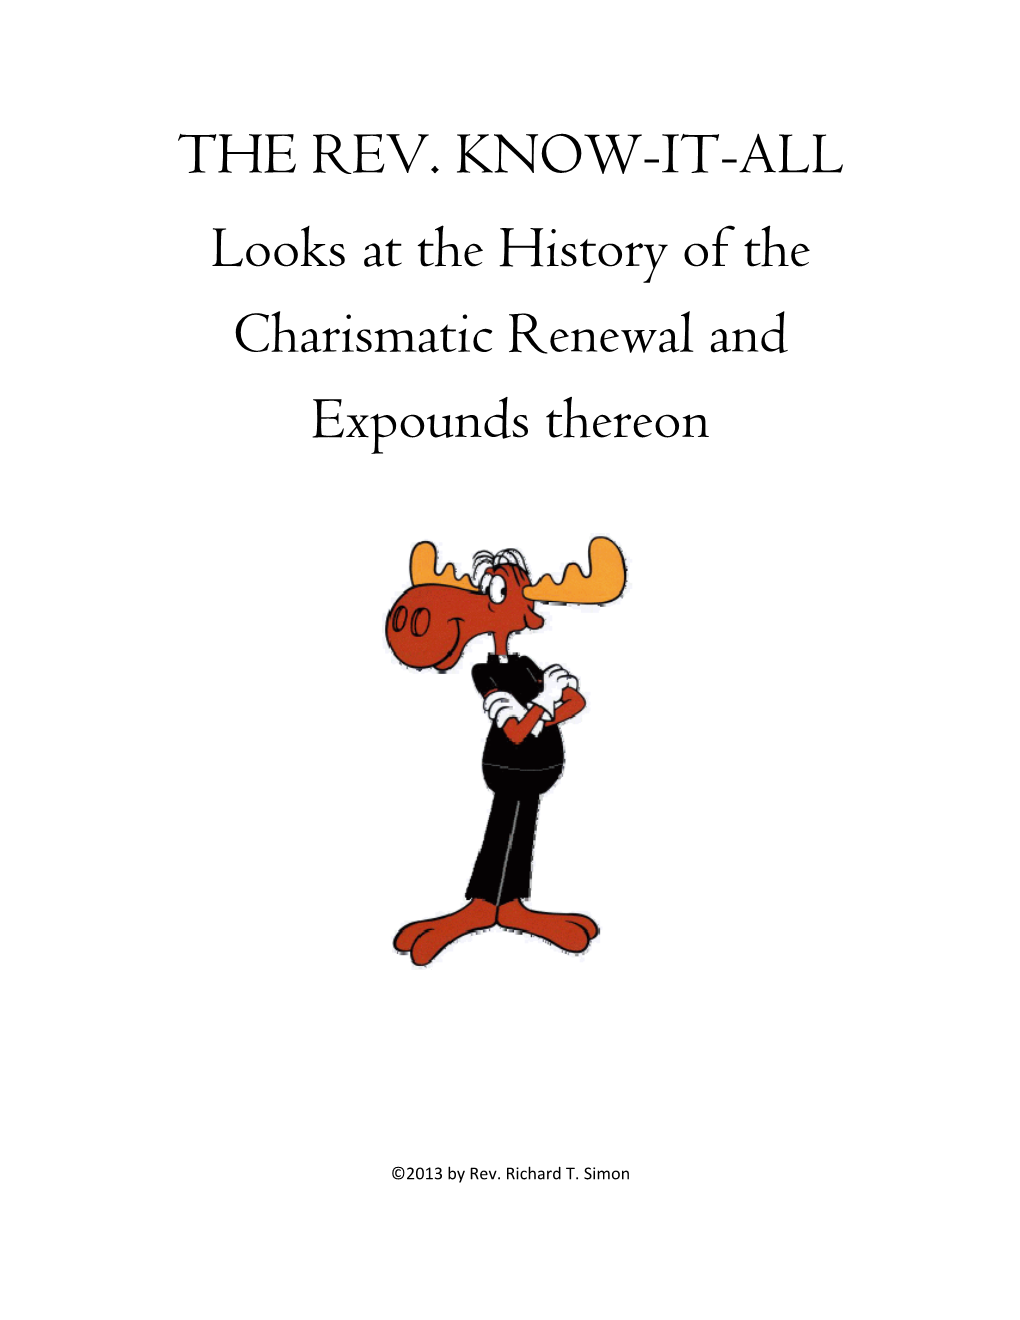 THE REV. KNOW-IT-ALL Looks at the History of the Charismatic Renewal and Expounds Thereon